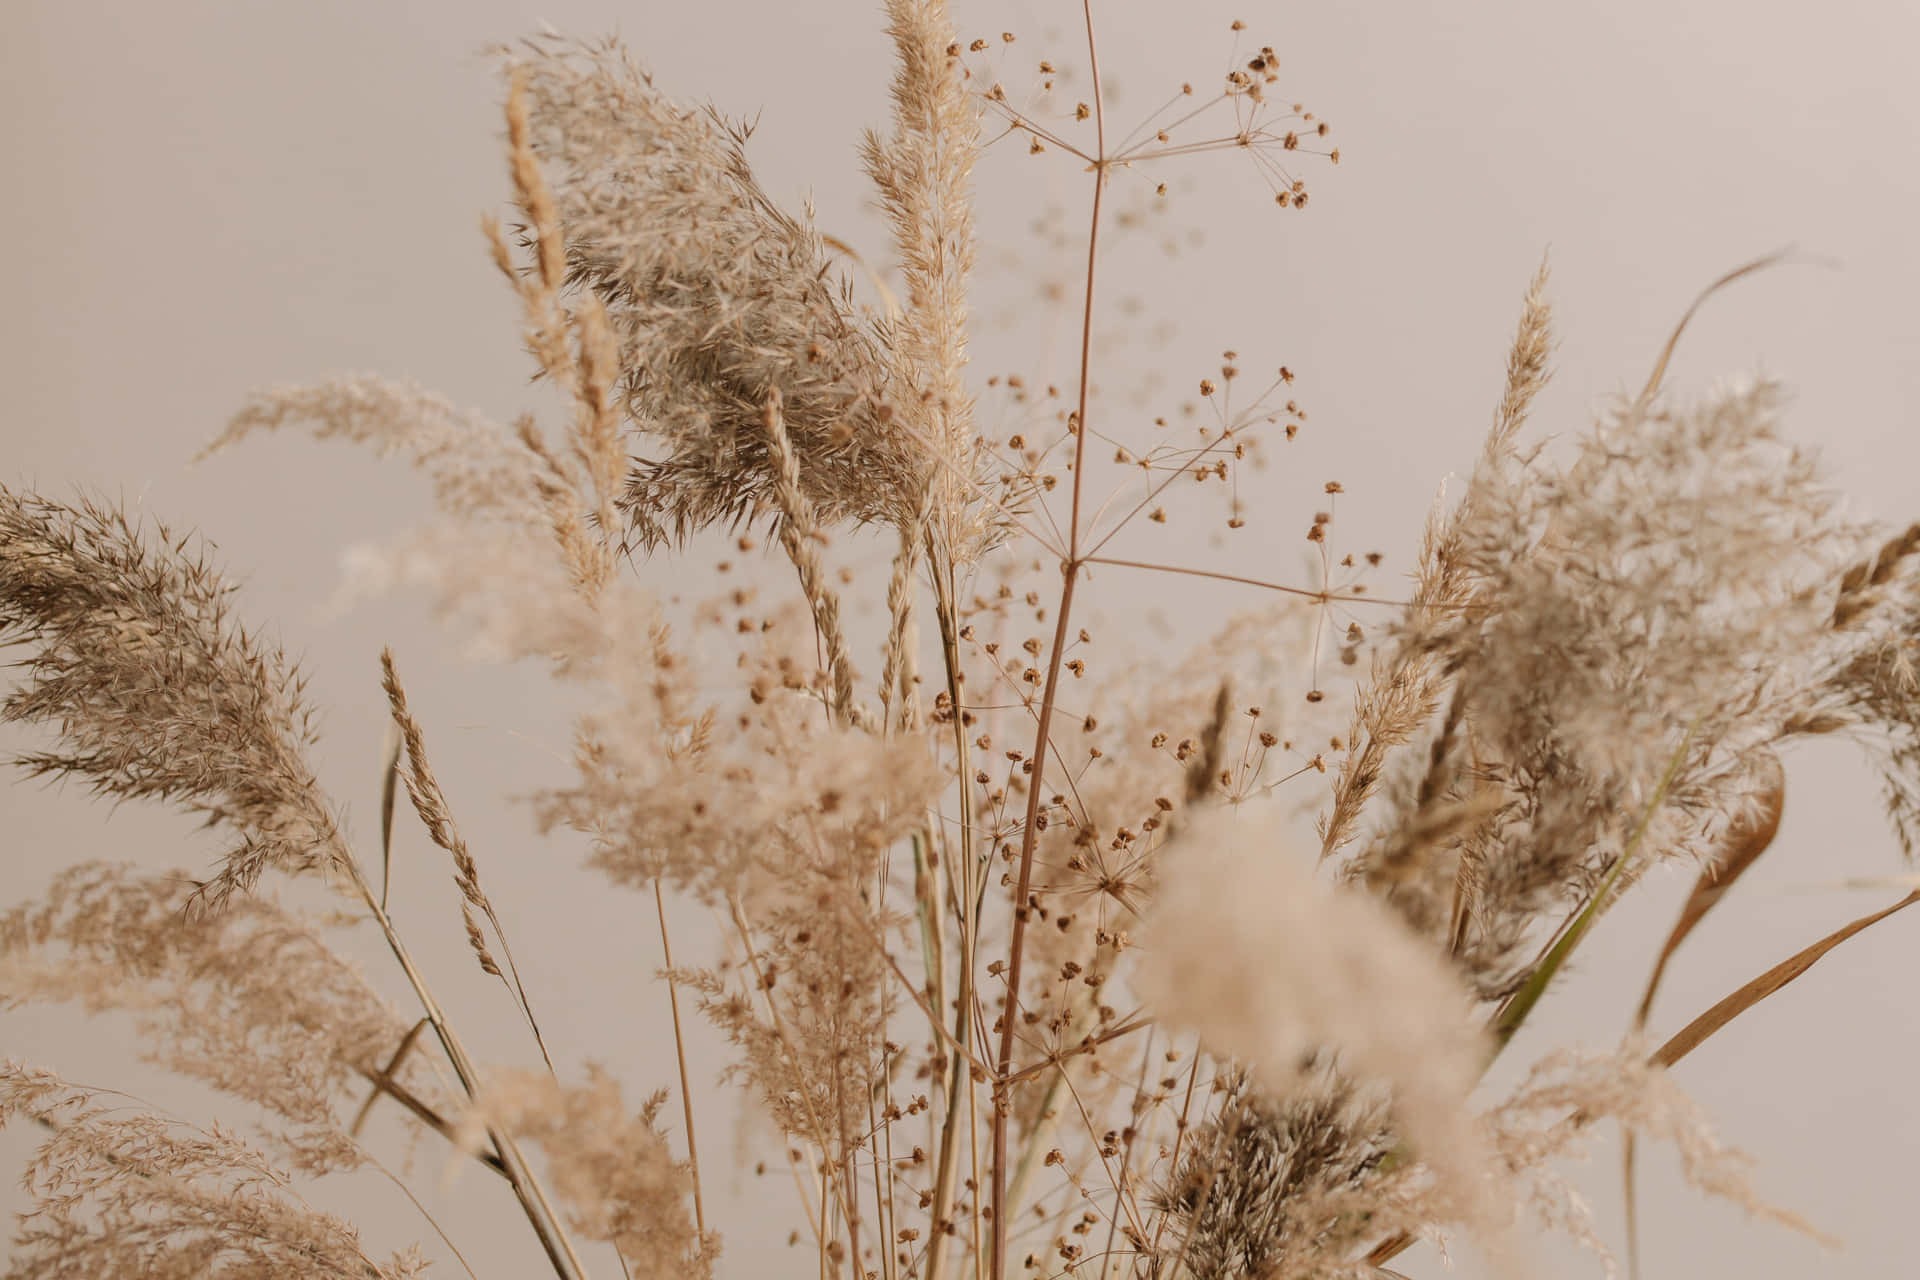 Lush Pampas Grass offers a rustic, natural look to any landscape. Wallpaper